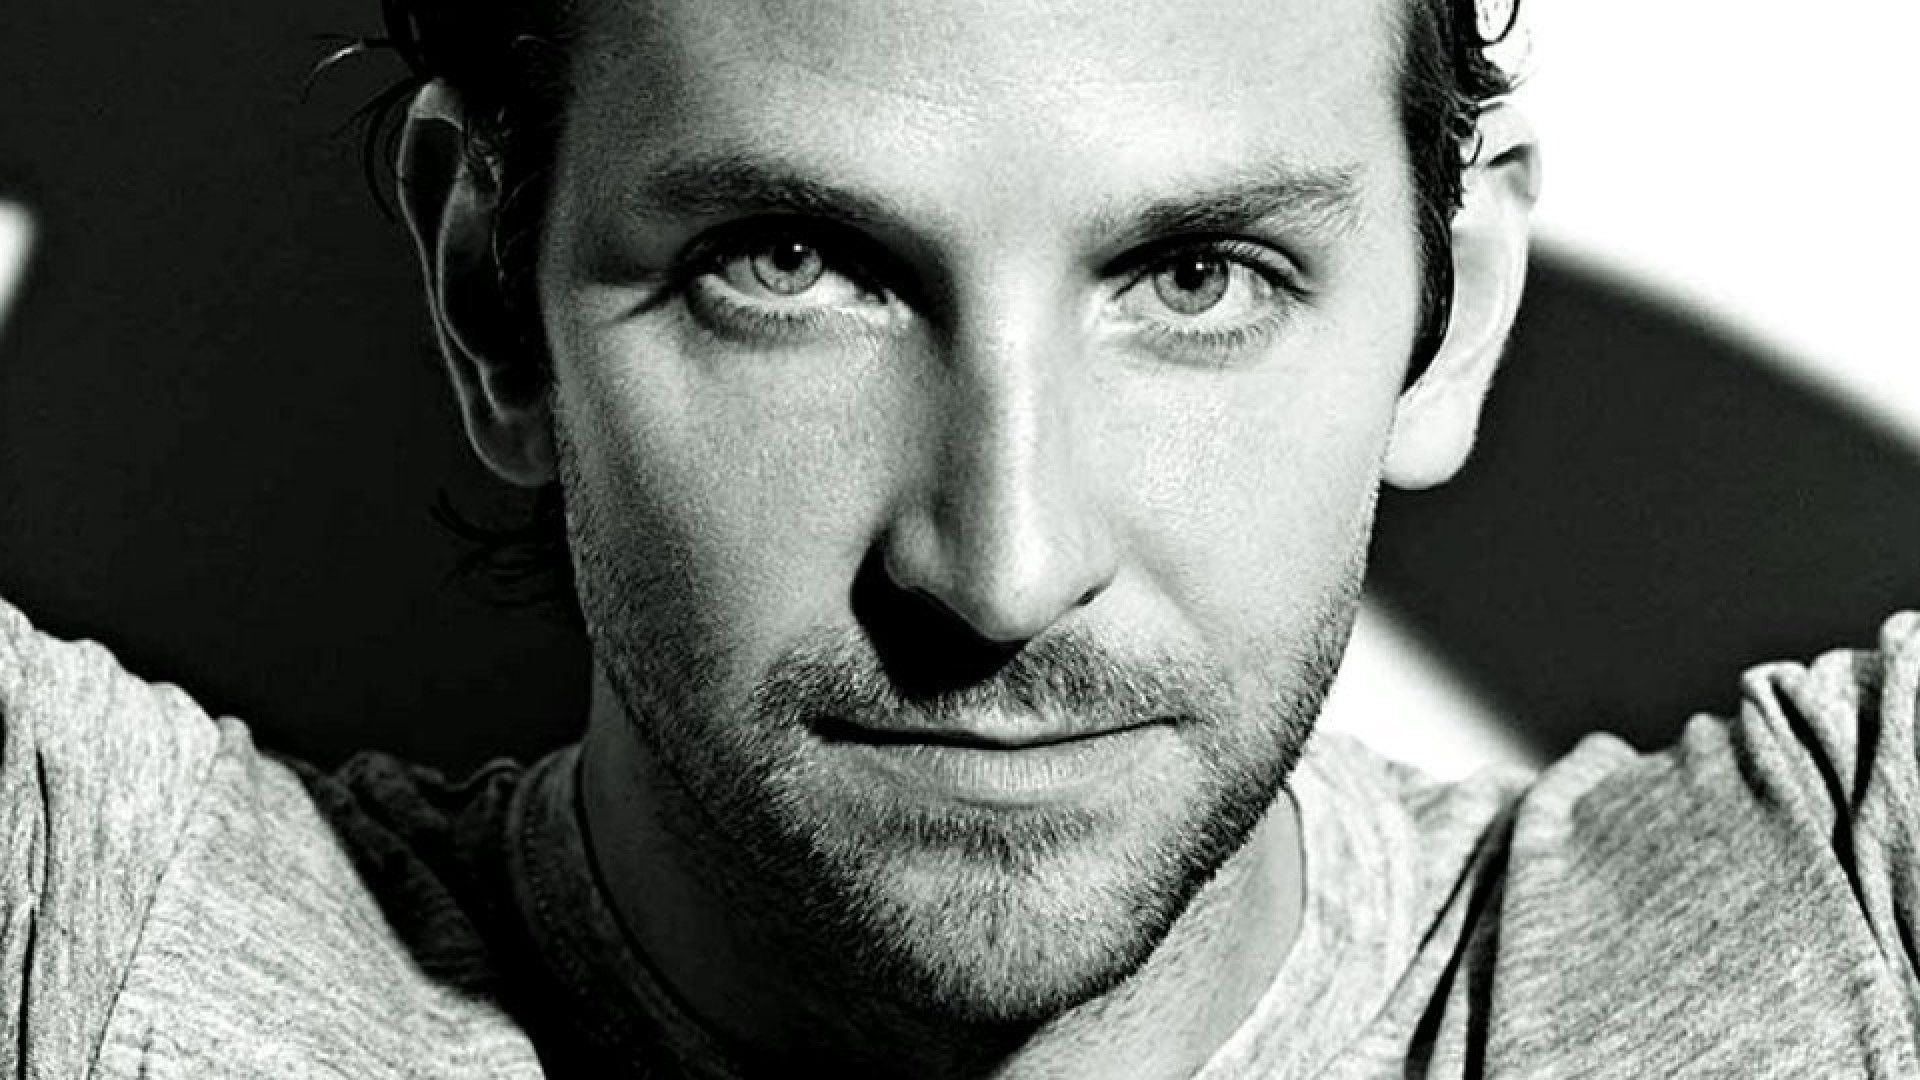 The Hangover: Bradley Cooper, Labeled a sex symbol by the media, Monochrome. 1920x1080 Full HD Background.